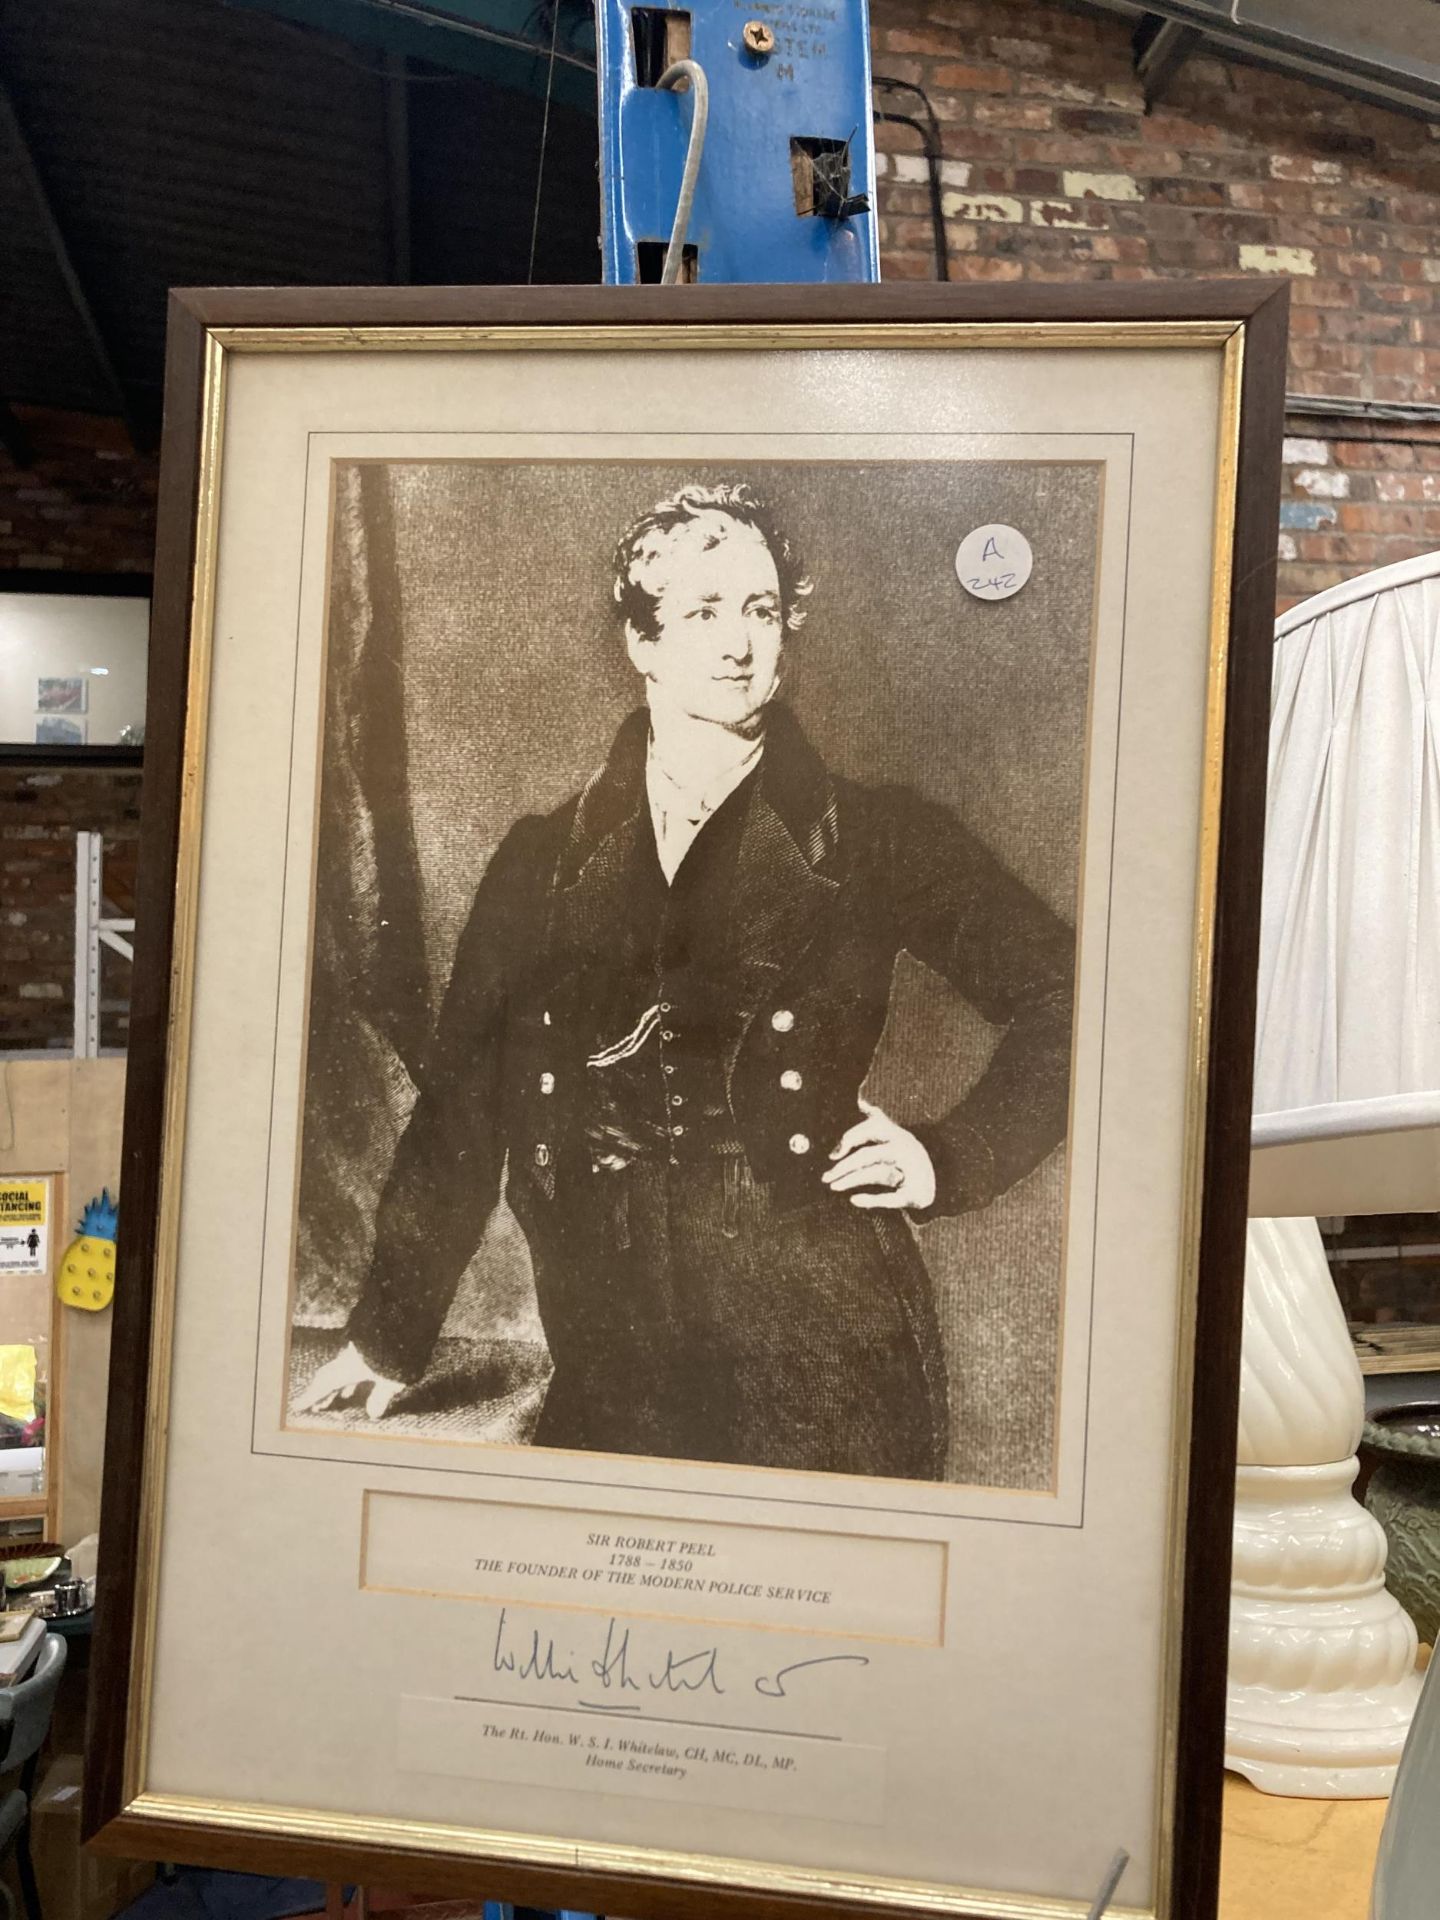 TWO FRAMED PHOTOGRAPHIC PRINTS - SIR ROBERT PEEL SIGNED BY WILLIAM WHITELAW M. P. AND SGT. - Image 3 of 5